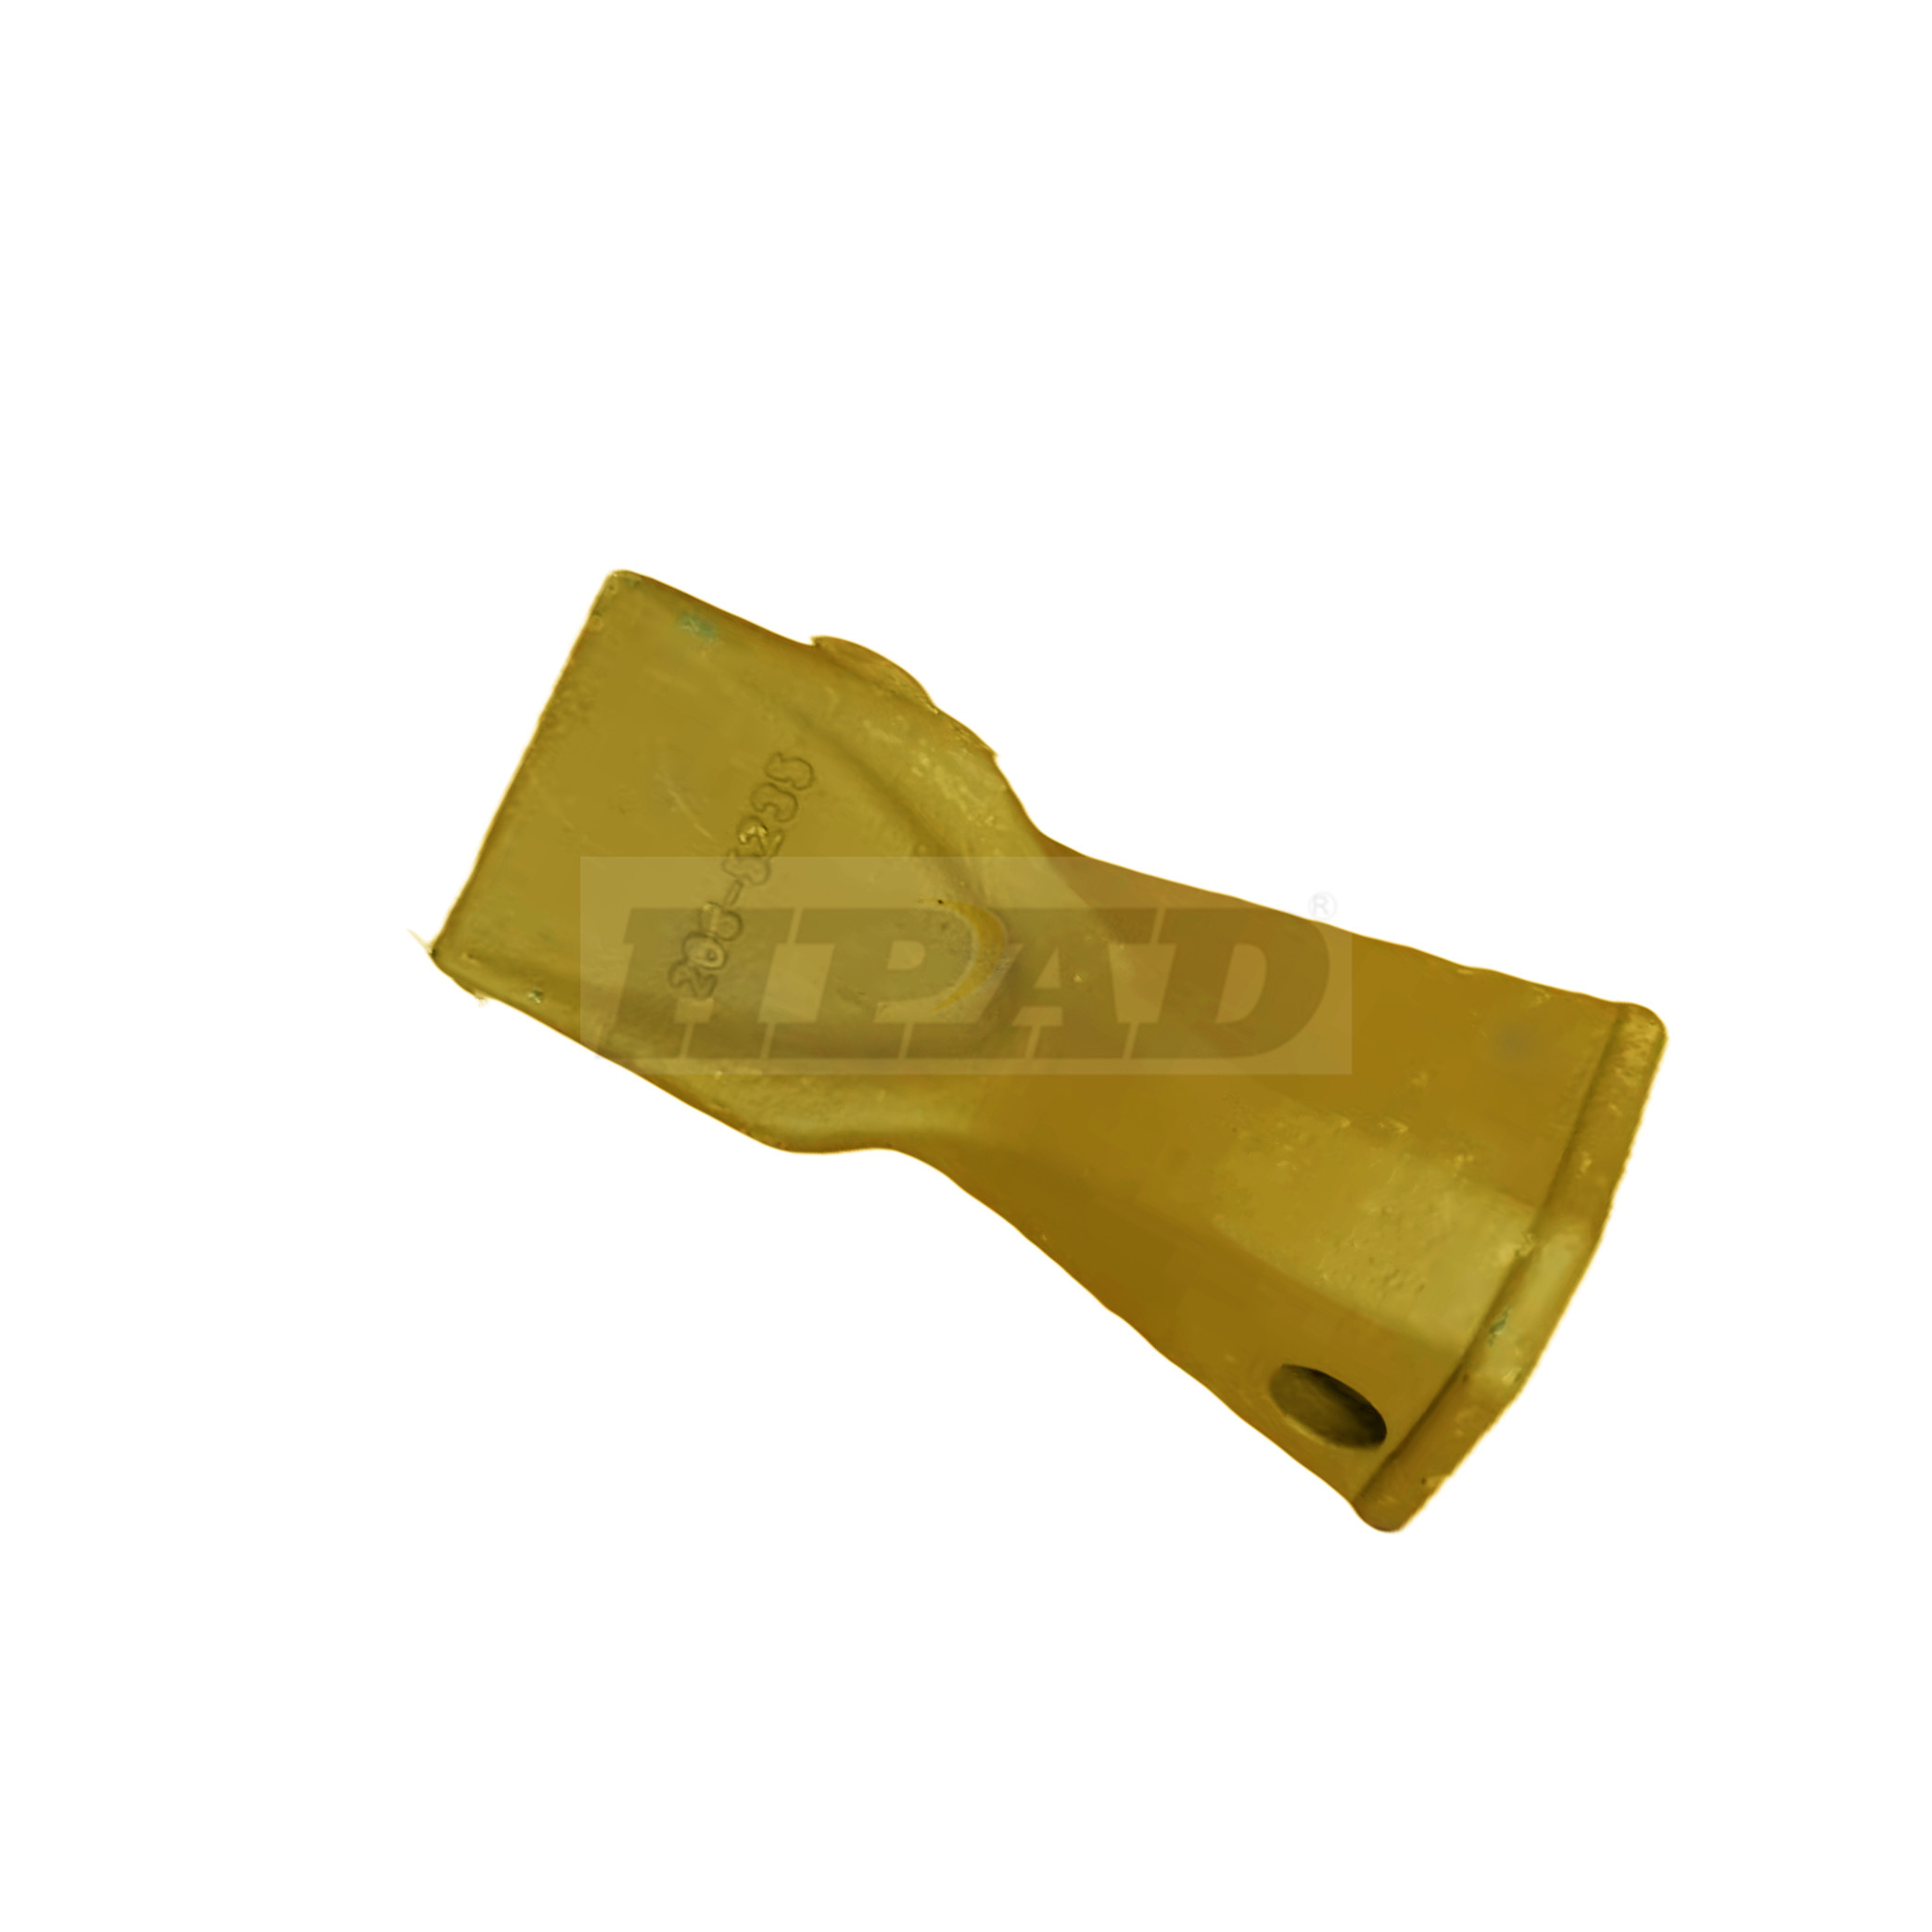 Construction Machinery Wear Parts Bucket Tooth 208-